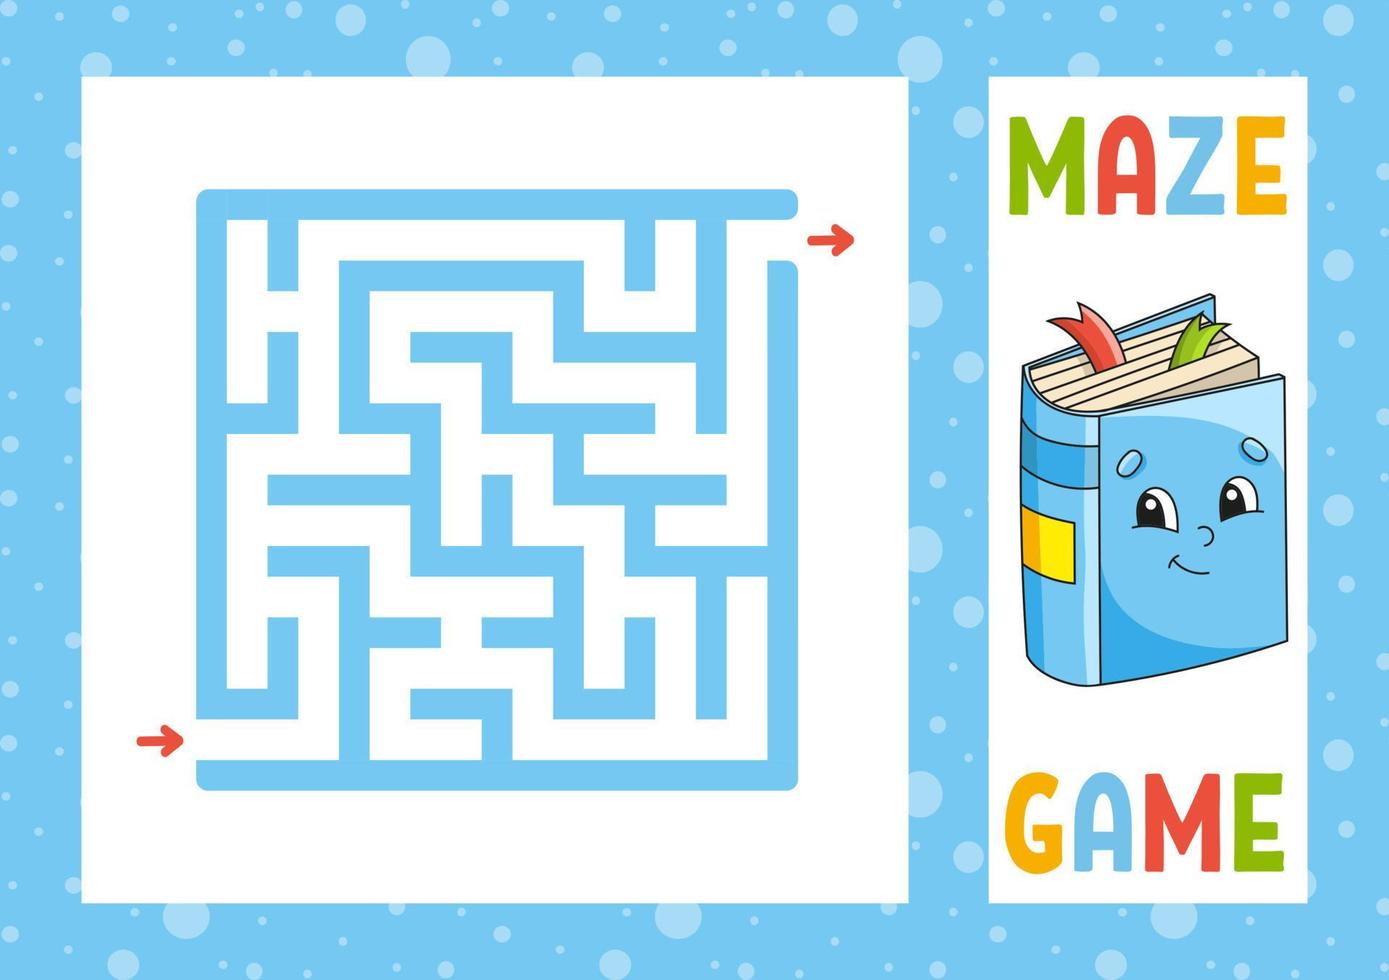 Square maze. Game for kids. Puzzle for children. Happy character. Labyrinth conundrum. Find the right path. Vector illustration.